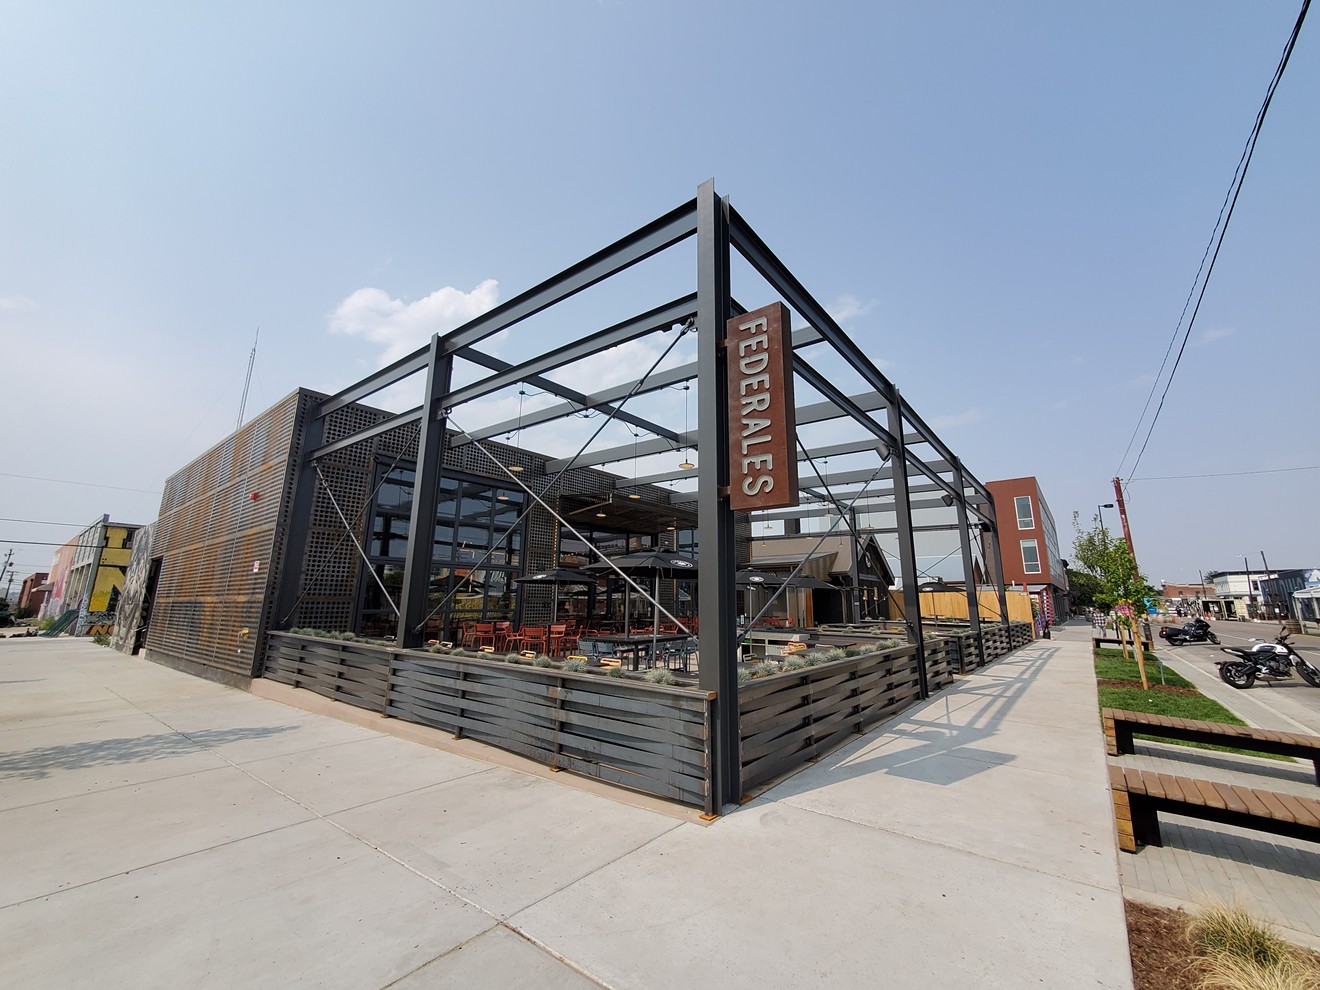 Federales's rooftop is retractable and there are garage doors at the front for an open-air feel.